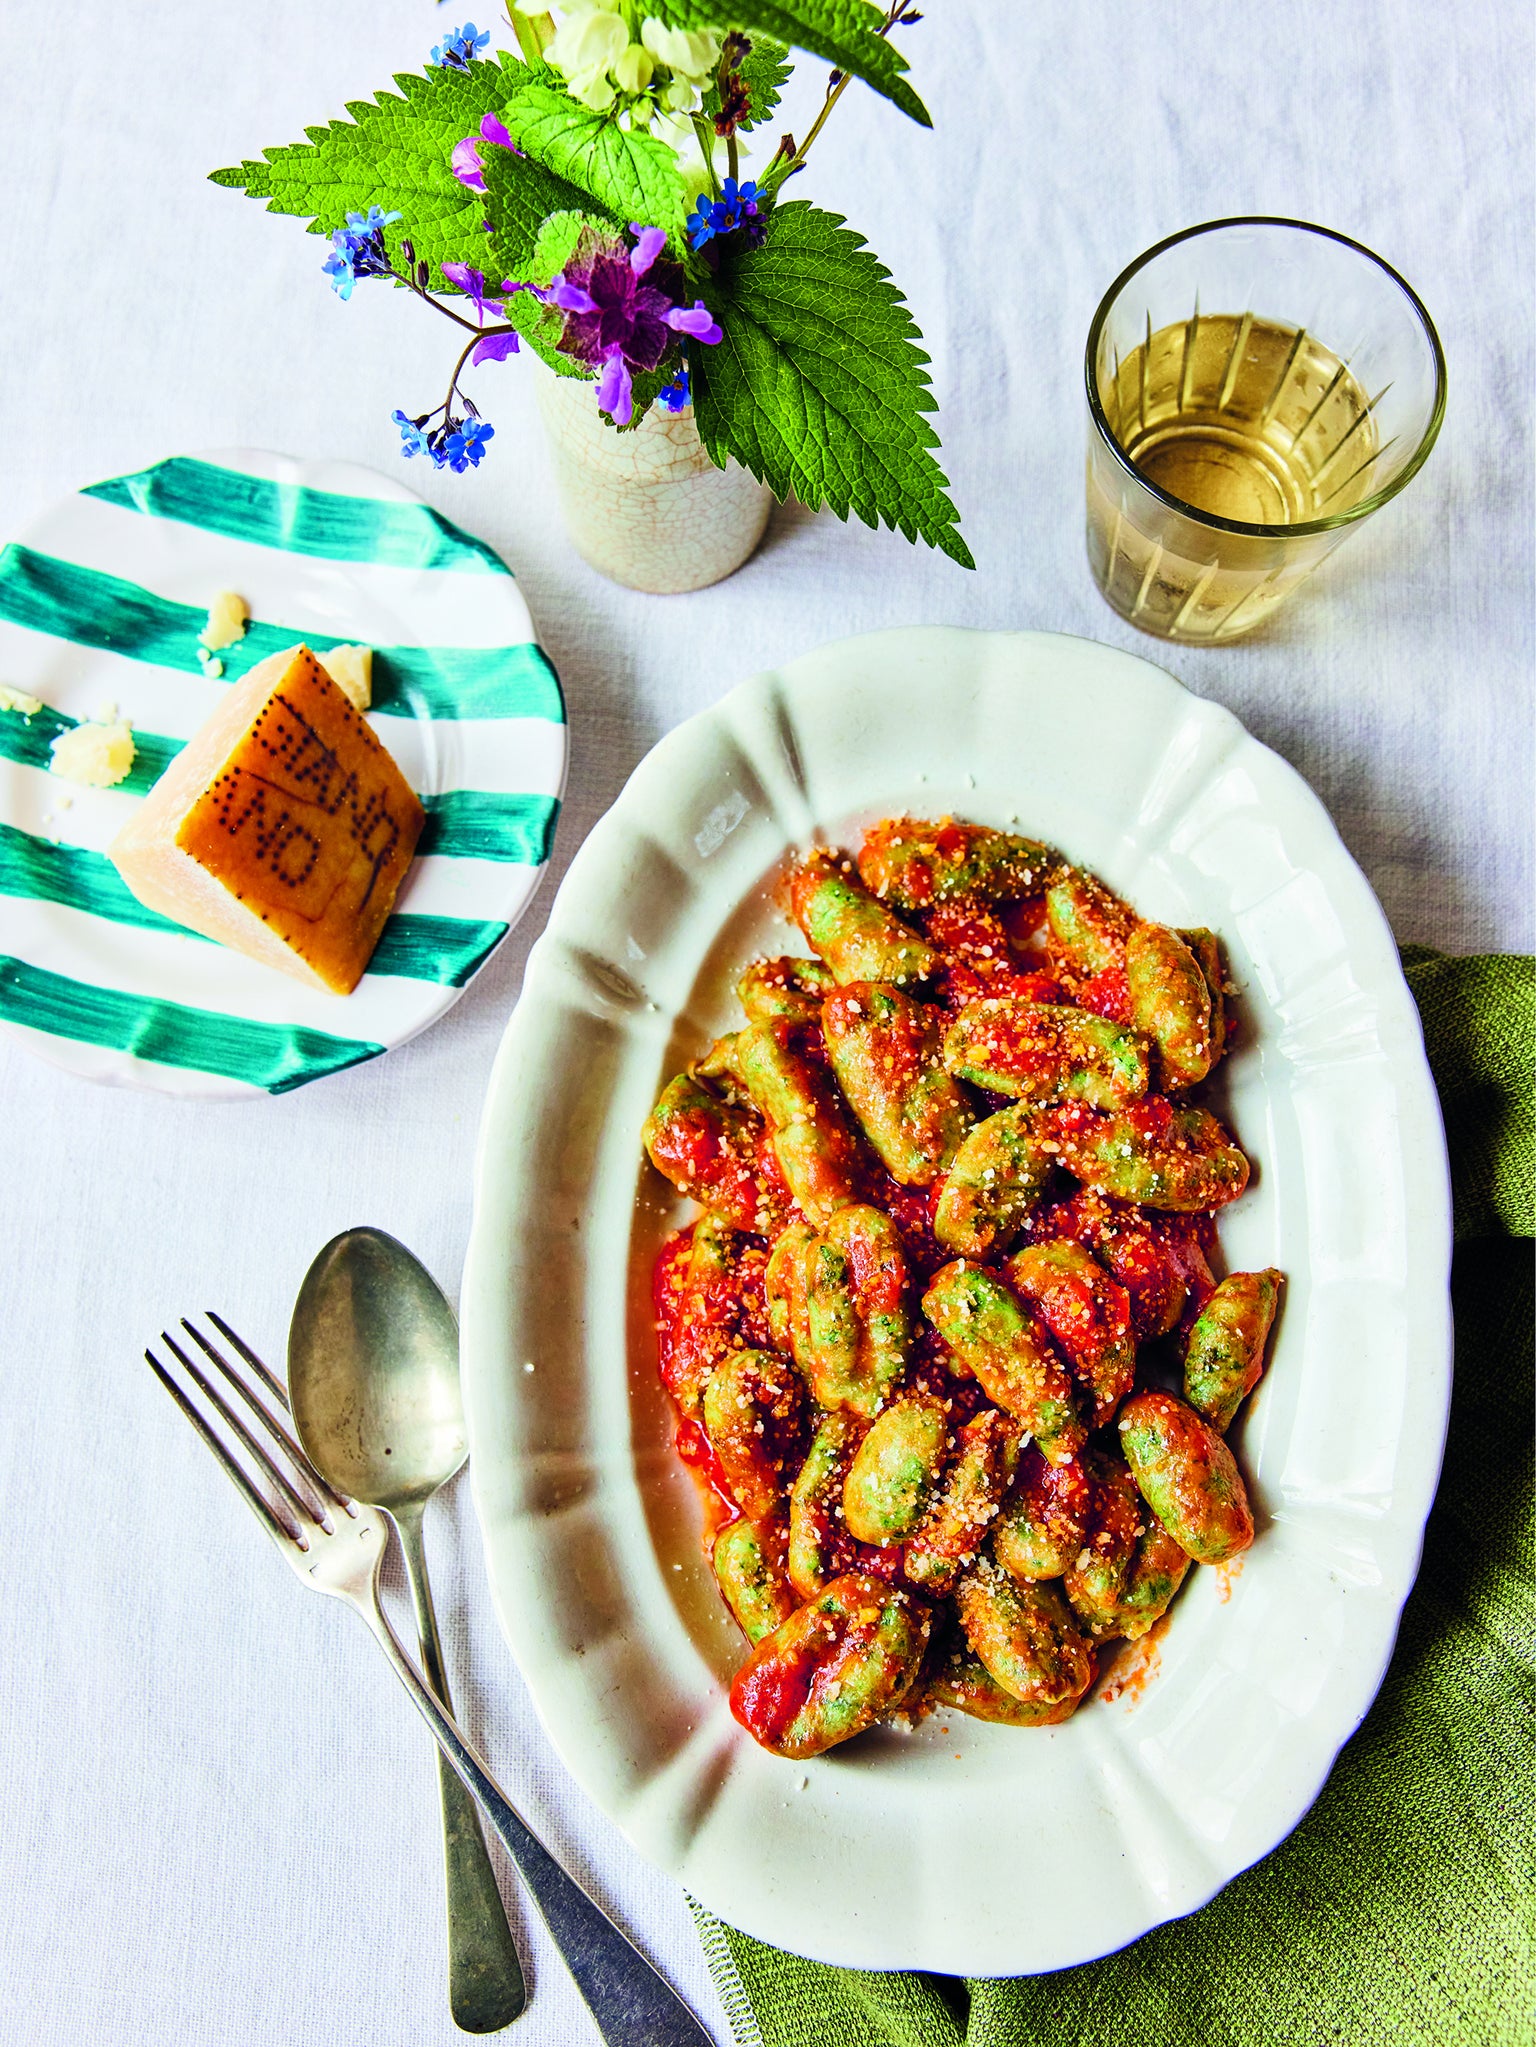 Jamie Oliver’s mentor Gennaro Contaldo champions spinach in this tasty dish